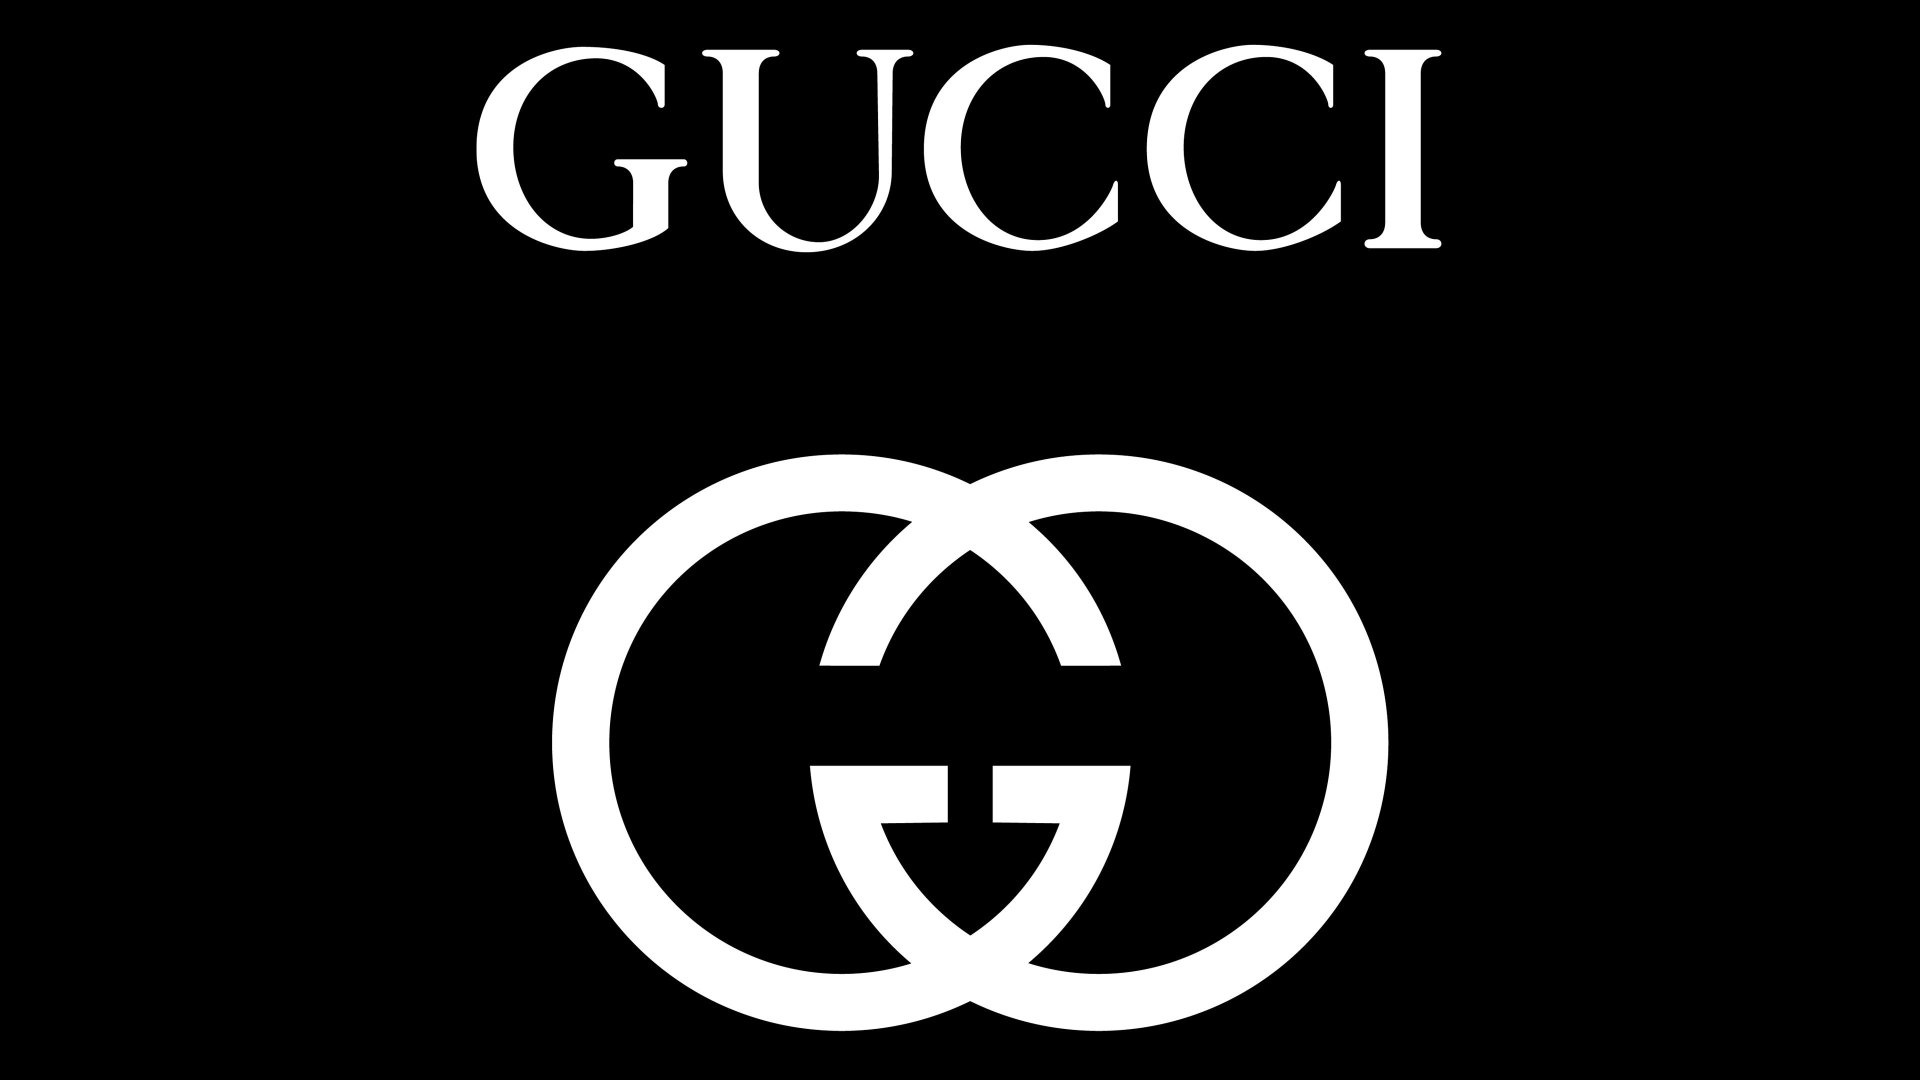 Gucci: Holding company based in Florence, Italy, A subsidiary of the French luxury group Kering. 1920x1080 Full HD Wallpaper.